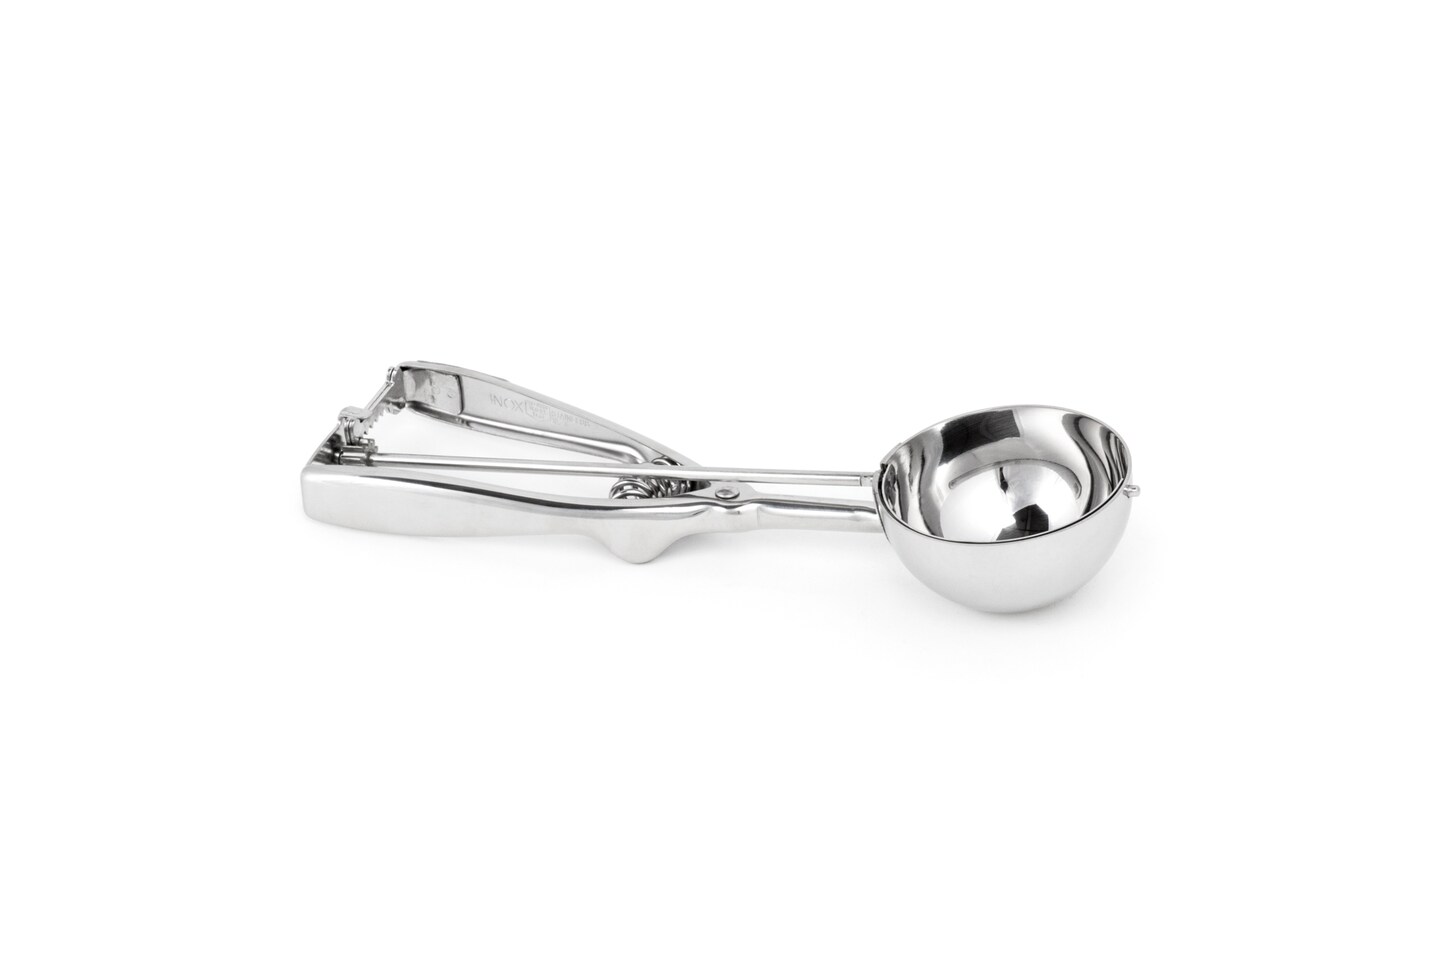 2.60 Inches / 66mm 18/8 Stainless Steel Ice Cream Scoop